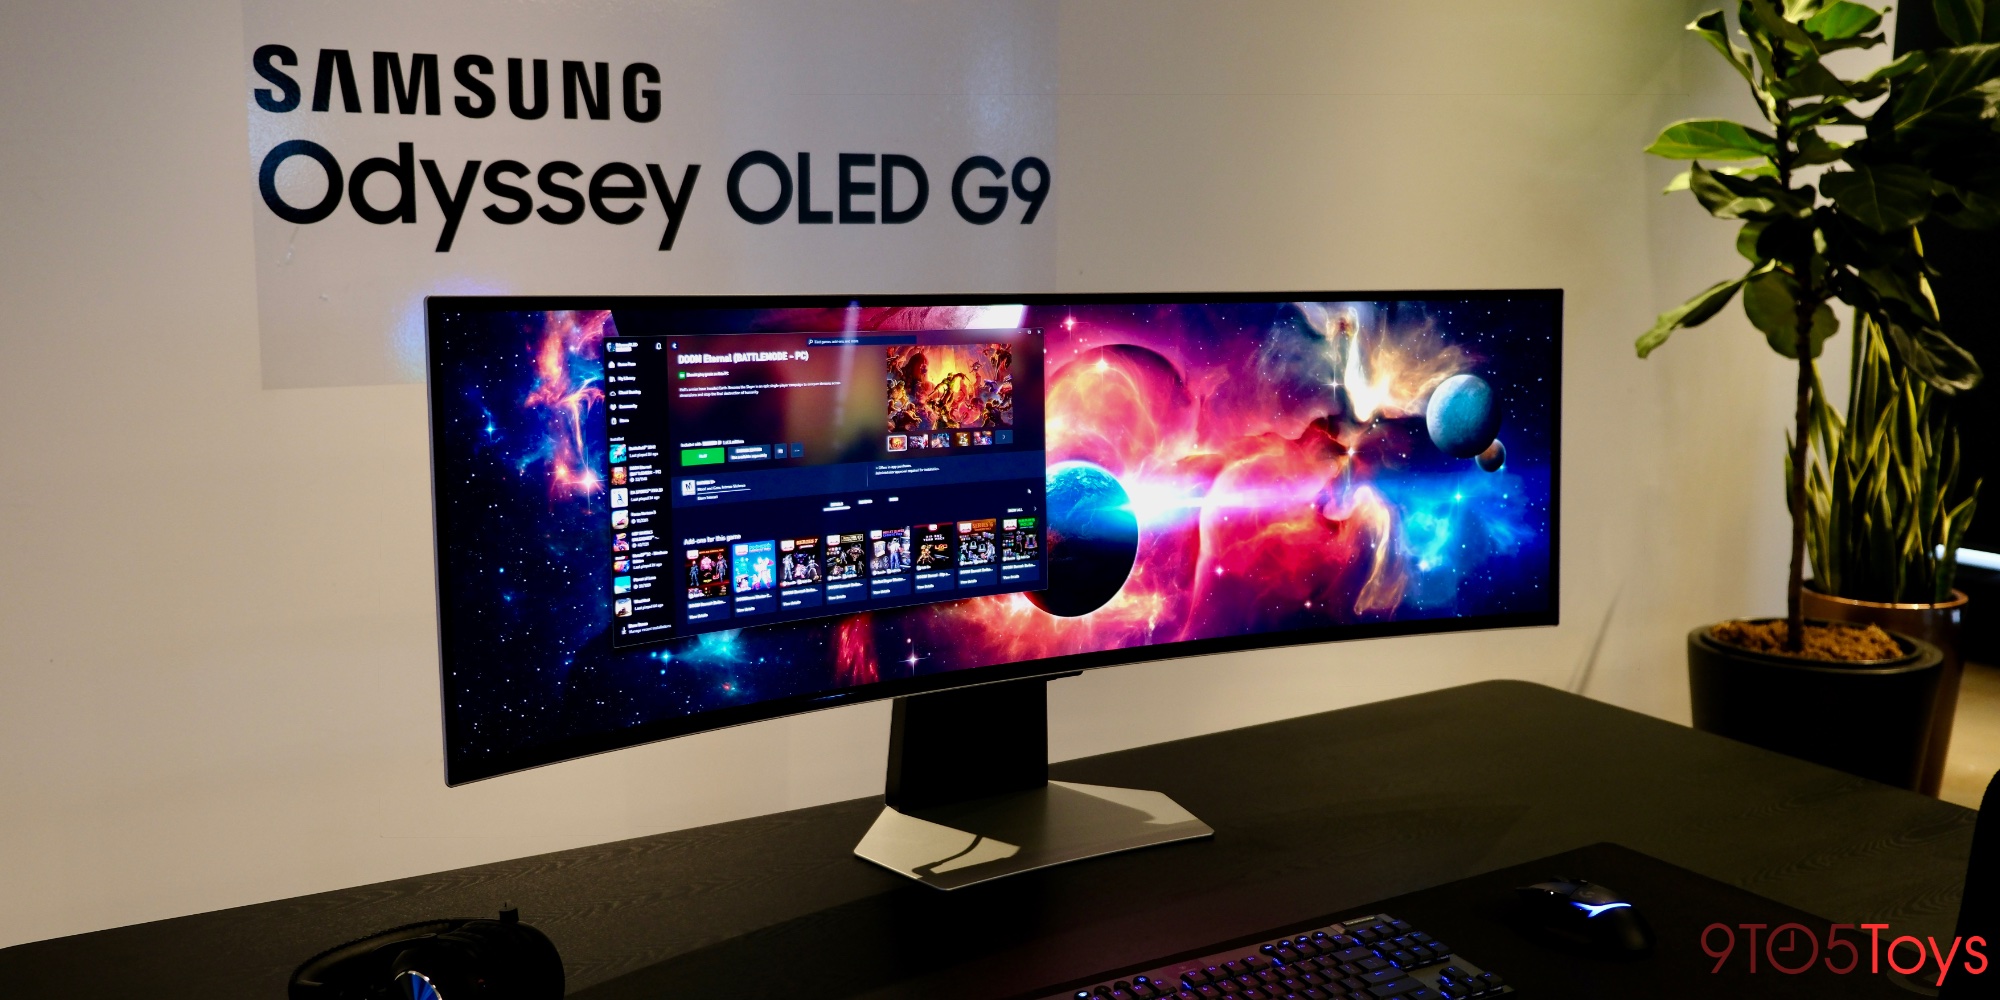 Ascension '+1'. These Samsung G9 specials are brilliant. $1499 AUD